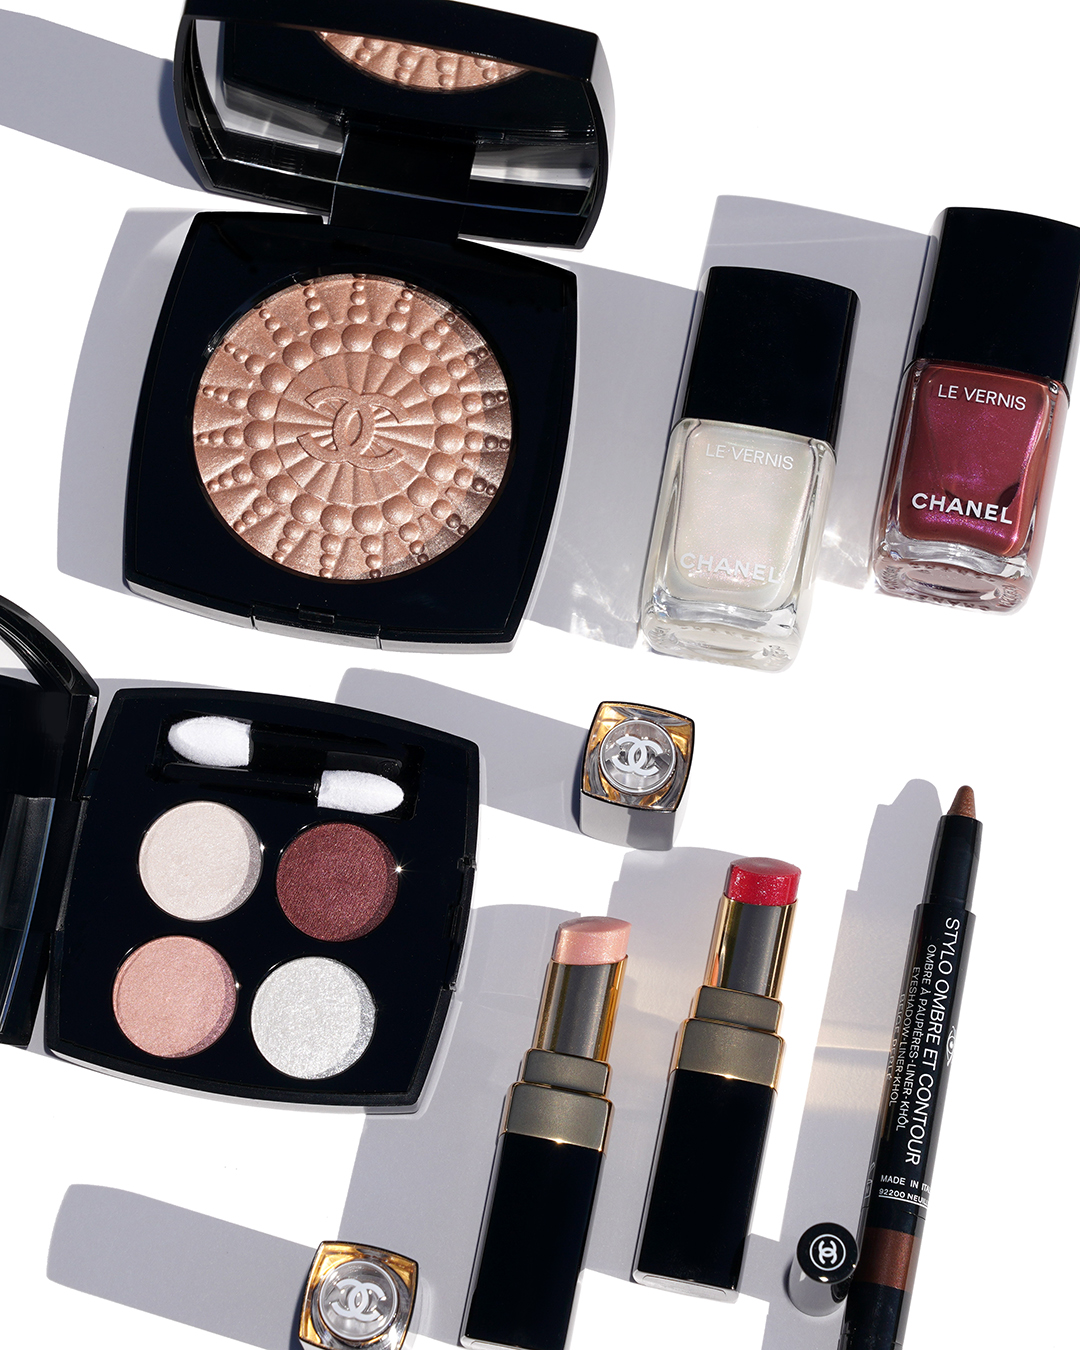 A new CHANEL Le Blanc makeup collection inspired by Japanese Akoya